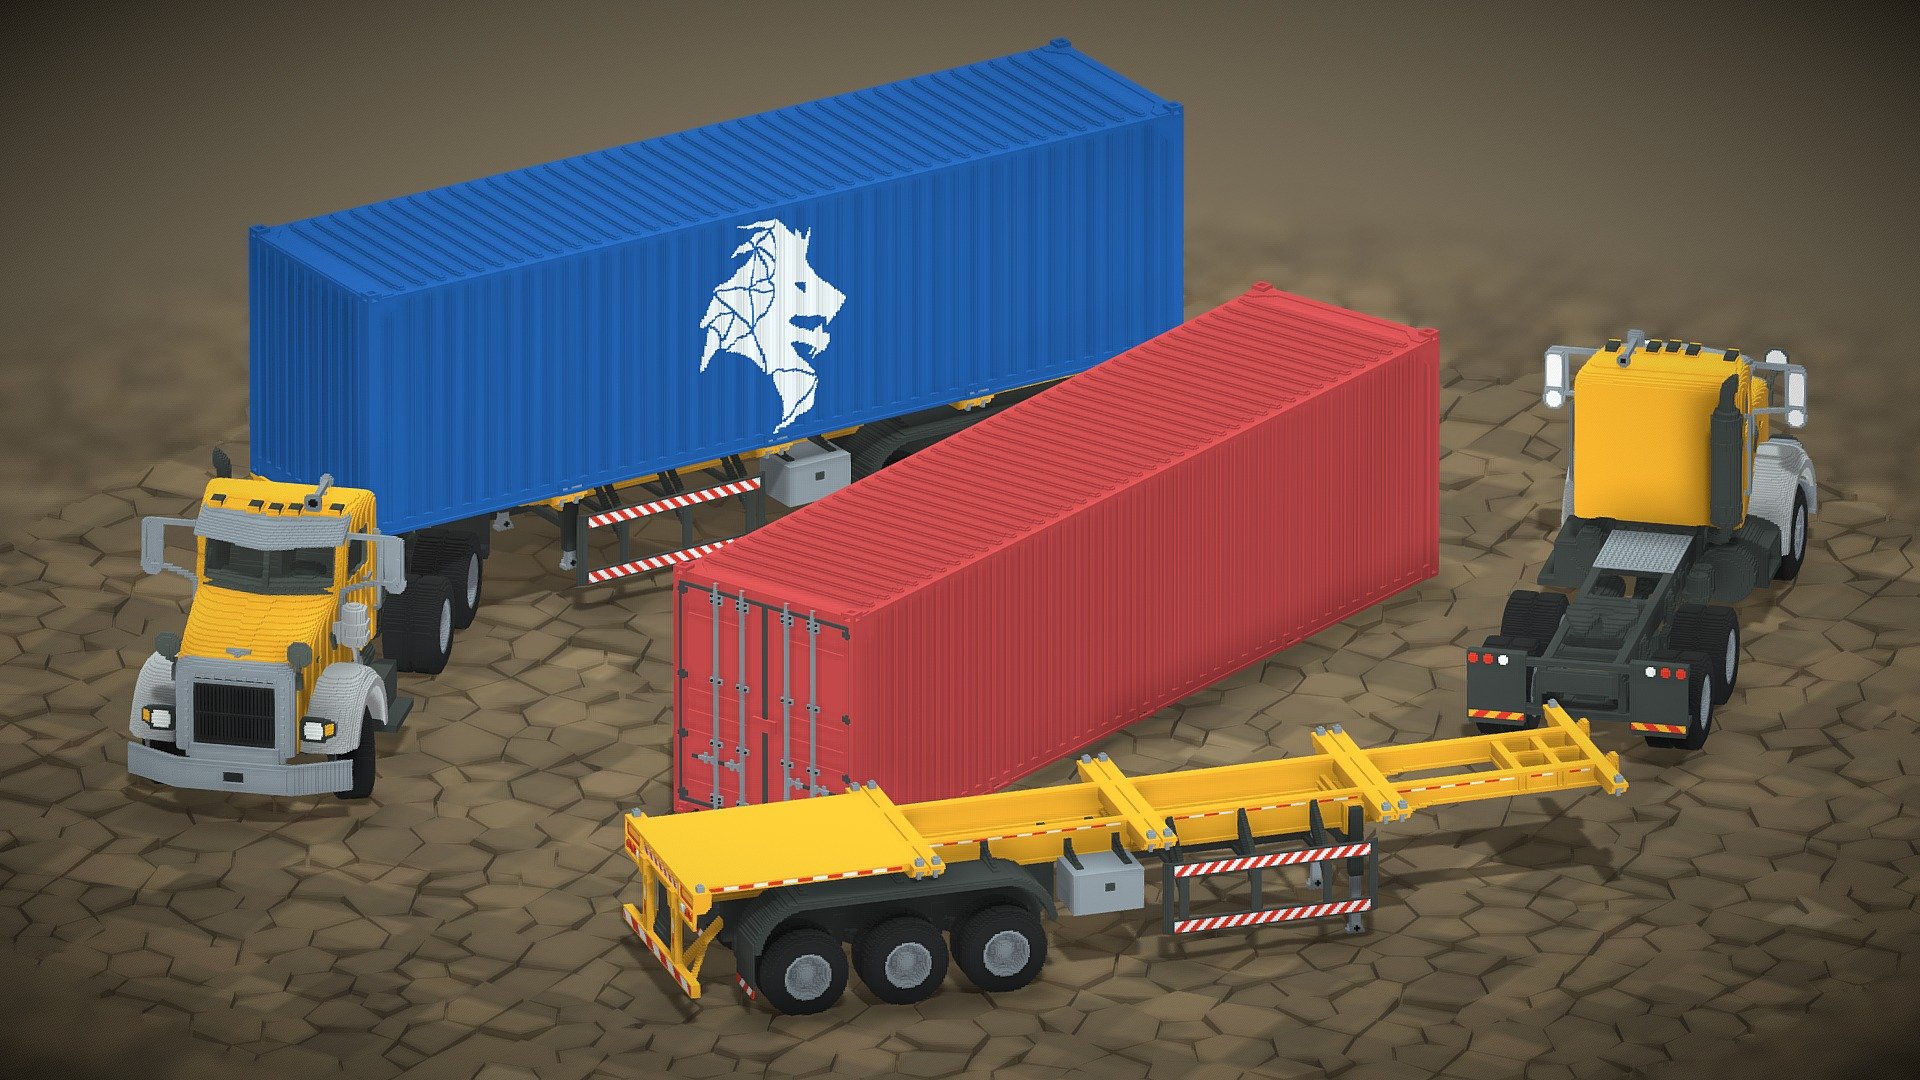 Voxel Container, Truck And Trailer high details 3D models created by Shubbak3D in MagicaVoxel Editor.

Technical Details:

Voxel Container model composed of 2 parts:

Part 1 – (Voxel Size = 117 x 249 x 137)

Part 2 – (Voxel Size = 117 x 255 x 137)



Voxel Container Trailer model composed of 8 parts:

Part 1 – Front of the trailer (Voxel Size = 117 x 256 x 60)

Part 2 – Back of the trailer (Voxel Size = 117 x 256 x 67)

Part 3 – Wheels x6 (Voxel Size = 27 x 45 x 45)



Voxel Truck model composed of 8 parts:

Part 1 – Front of the truck (Voxel Size = 141 x 204 x 130)

Part 2 – Back of the truck  (Voxel Size = 117 x 144 x 50)

Part 3 – Front Wheels x2 (Voxel Size = 20 x 50 x 50)

Part 4 – Back Wheels x4 (Voxel Size = 29 x 50 x 50)



All Formats Size: 113 MB

Zip File Size: 12.9 MB

Polys Count: 325534

Verts Count: 478958

Available Formats: .vox (MagicaVoxel version 0.99.7) .max (3ds max 2021 default include all) .qb .obj + mtl .fbx

Your feedback and rating are important for us 🙂 - Voxel Container, Truck And Trailer - Buy Royalty Free 3D model by SHUBBAK3D 3d model